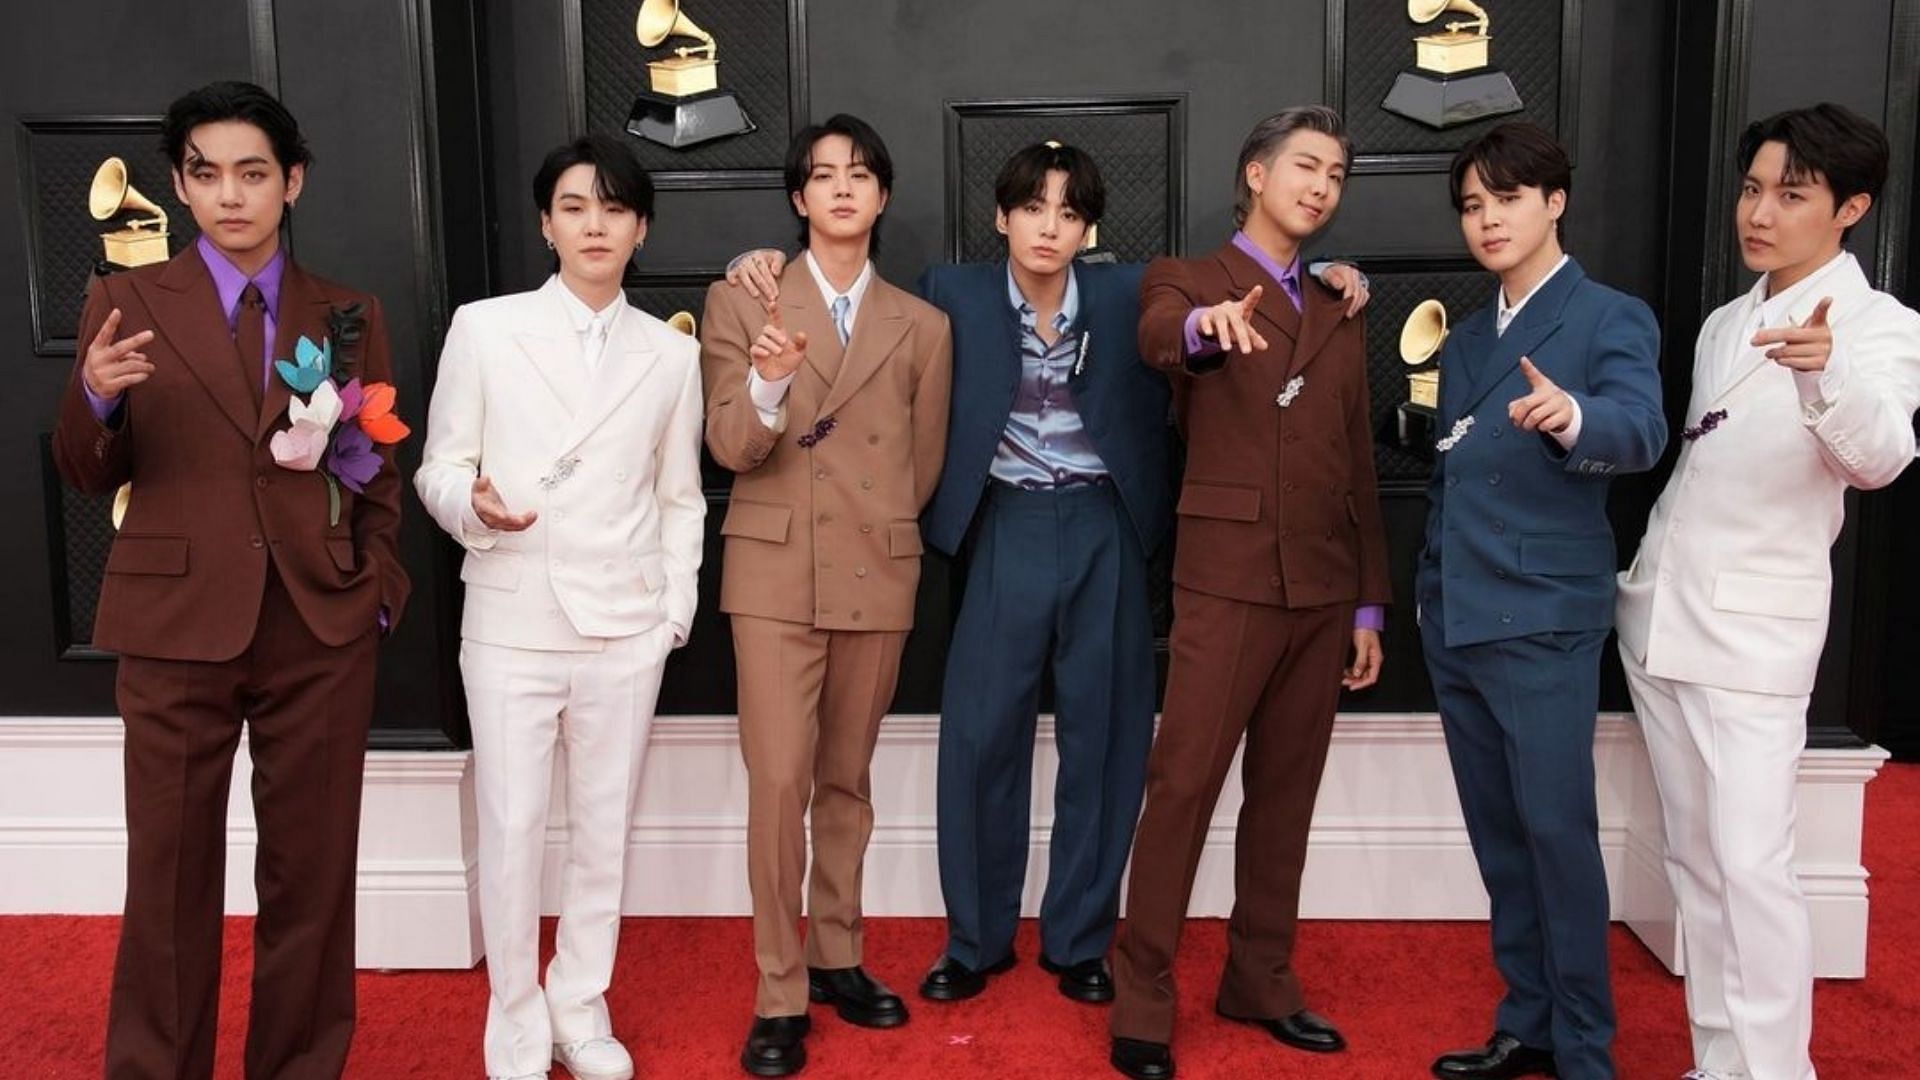 Fans were not happy that the Bangtan Boys were not presented with the Best Pop Duo/Group Performance Grammy award (Image via gettyentertainment/Instagram)